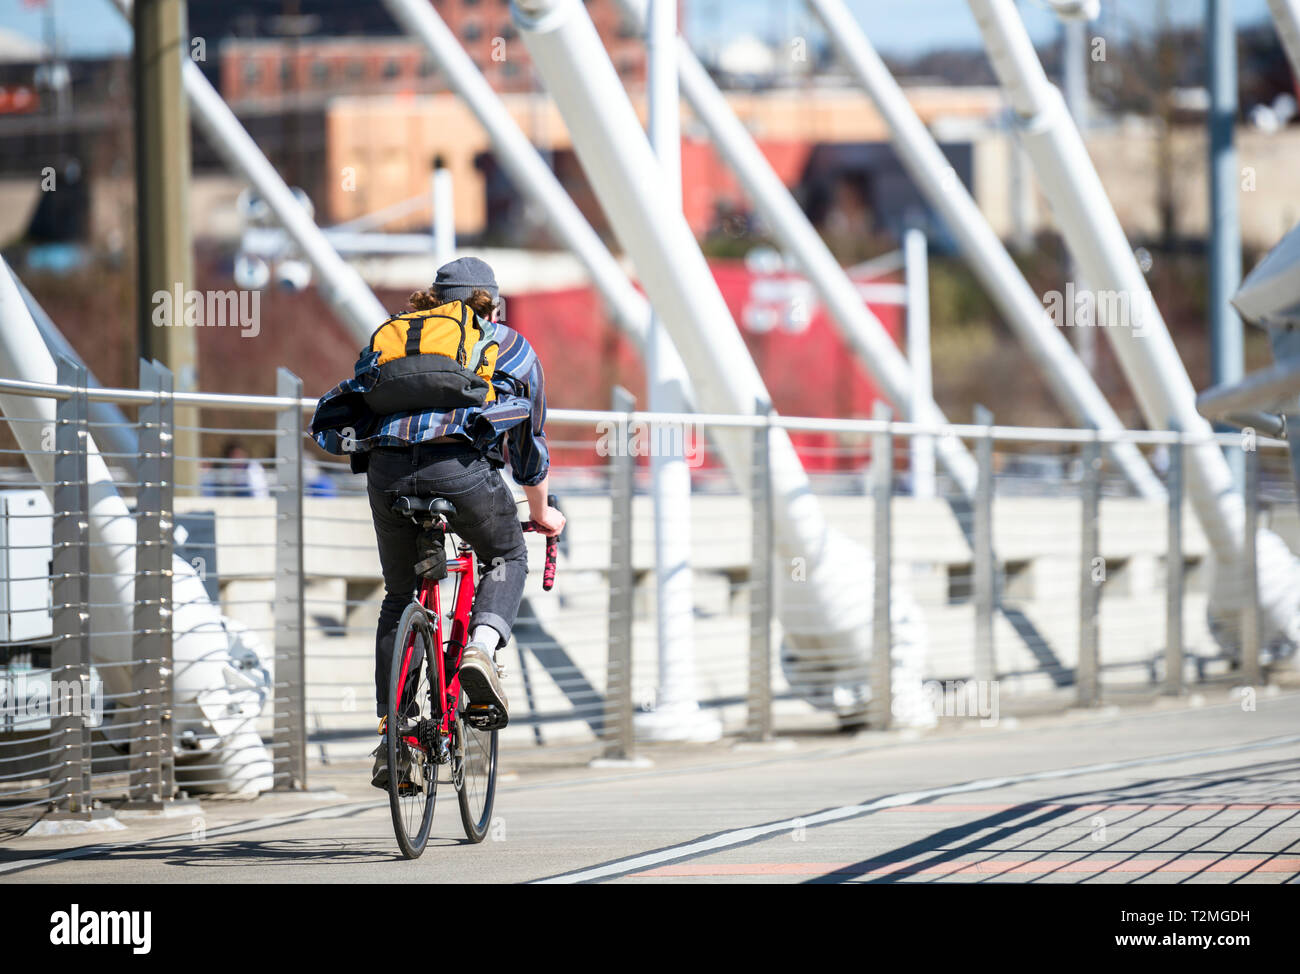 Man rides a bike on the bridge go to place of work preferring active healthy lifestyle and an alternative environmentally friendly mode of transport i Stock Photo